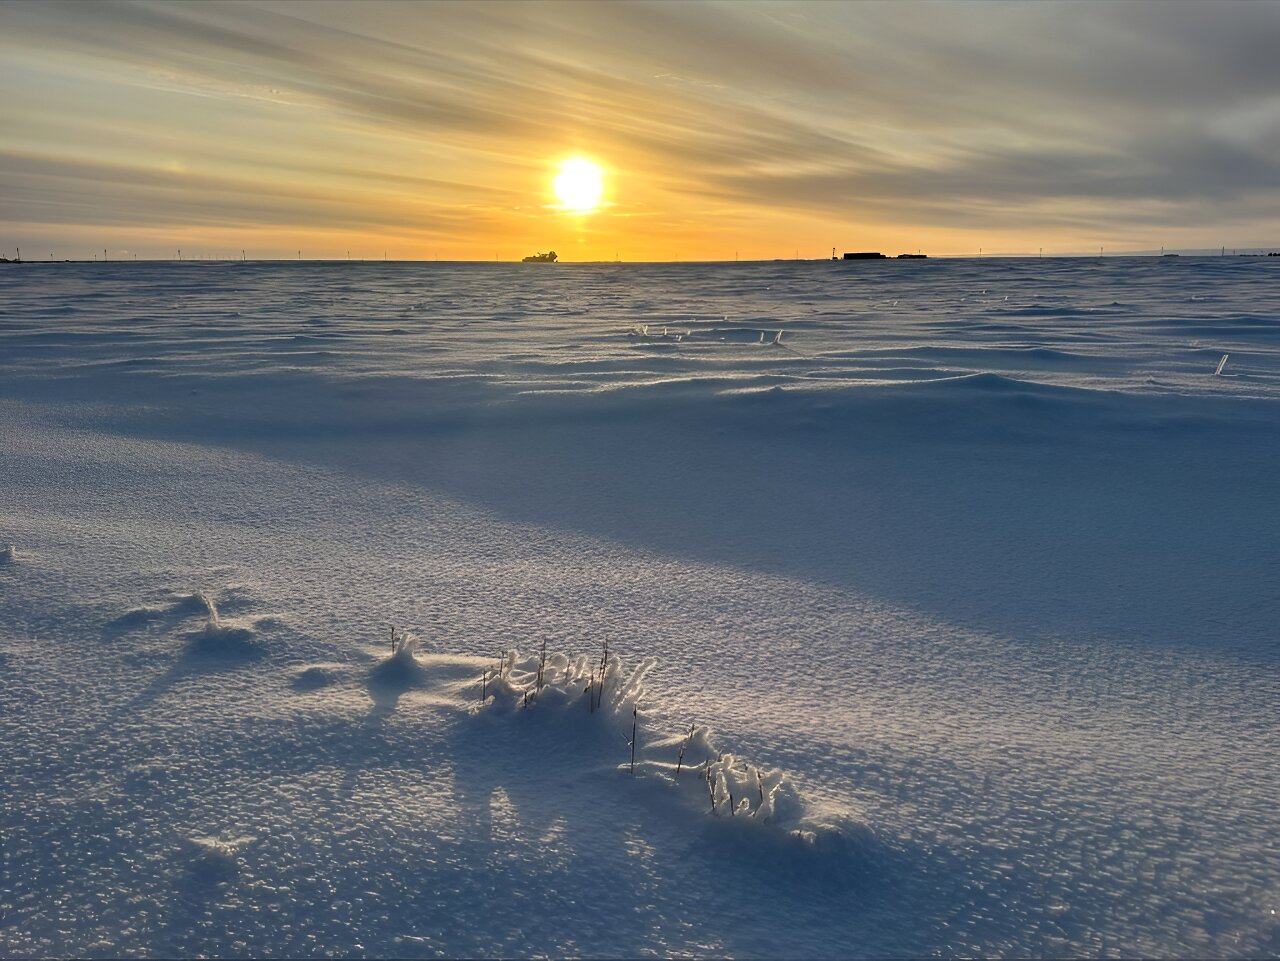 Chasing the light: Study finds new clues about warming in the Arctic